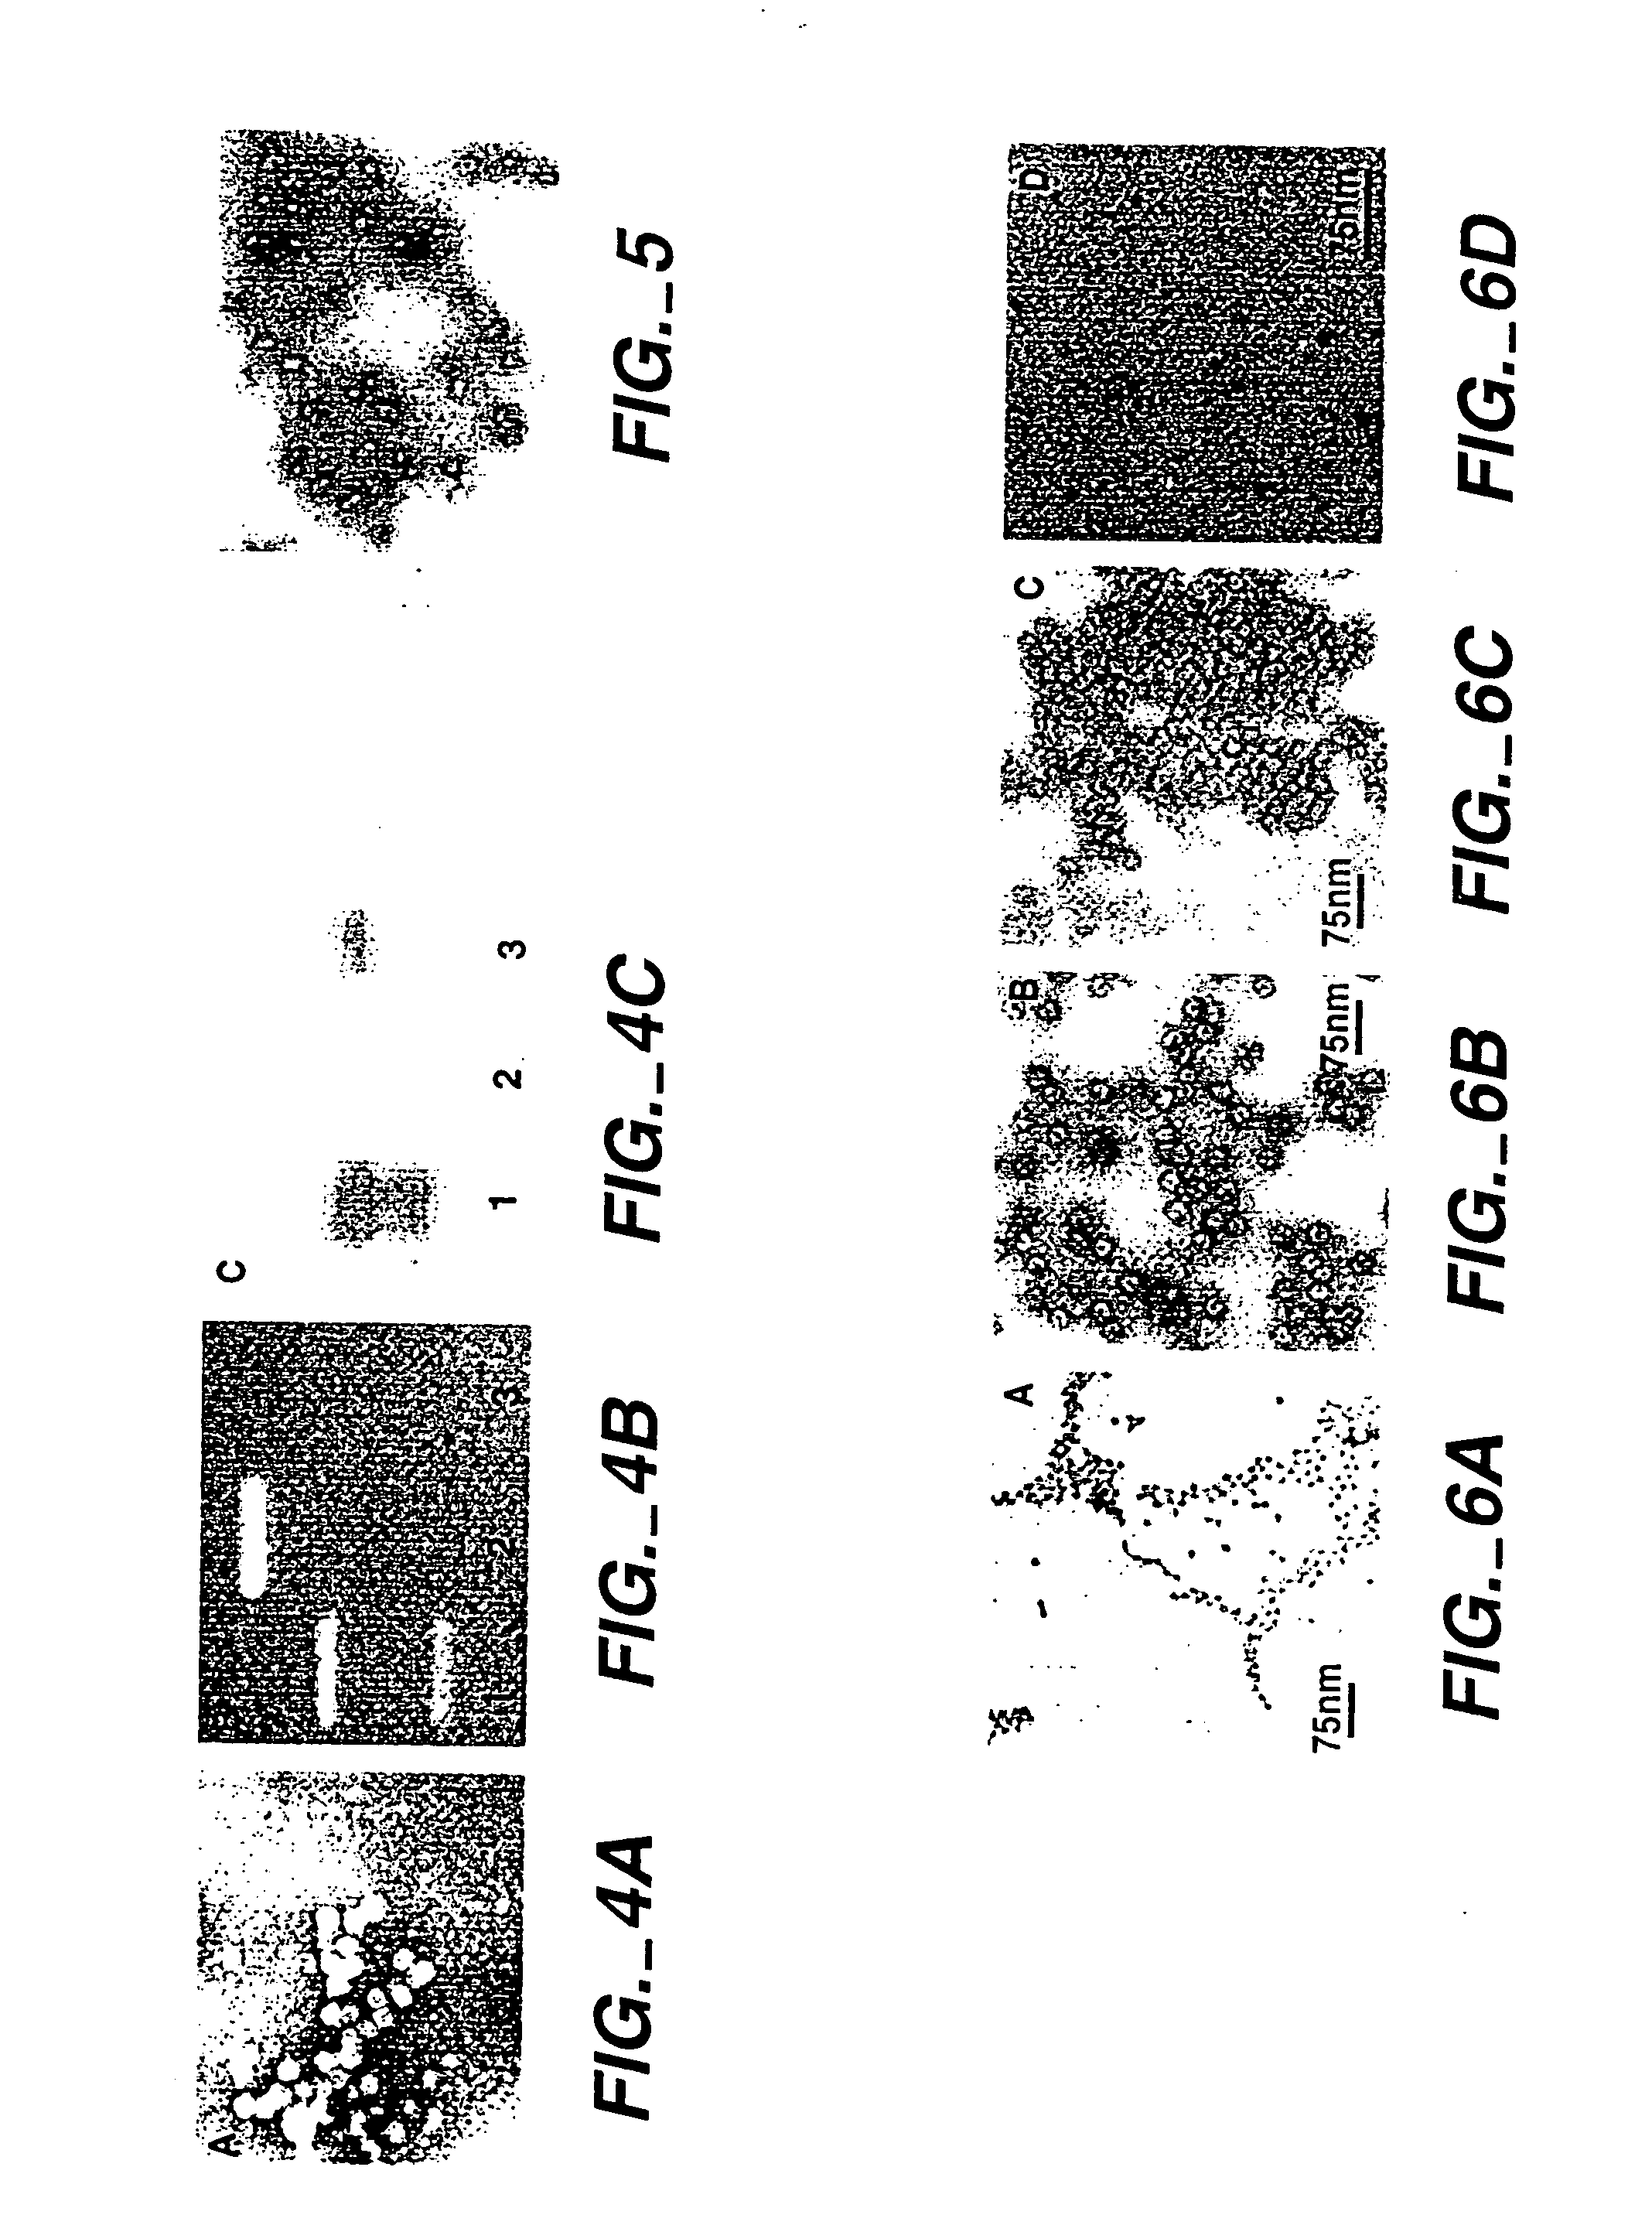 Protein cages for the delivery of medical imaging and therapeutic agents